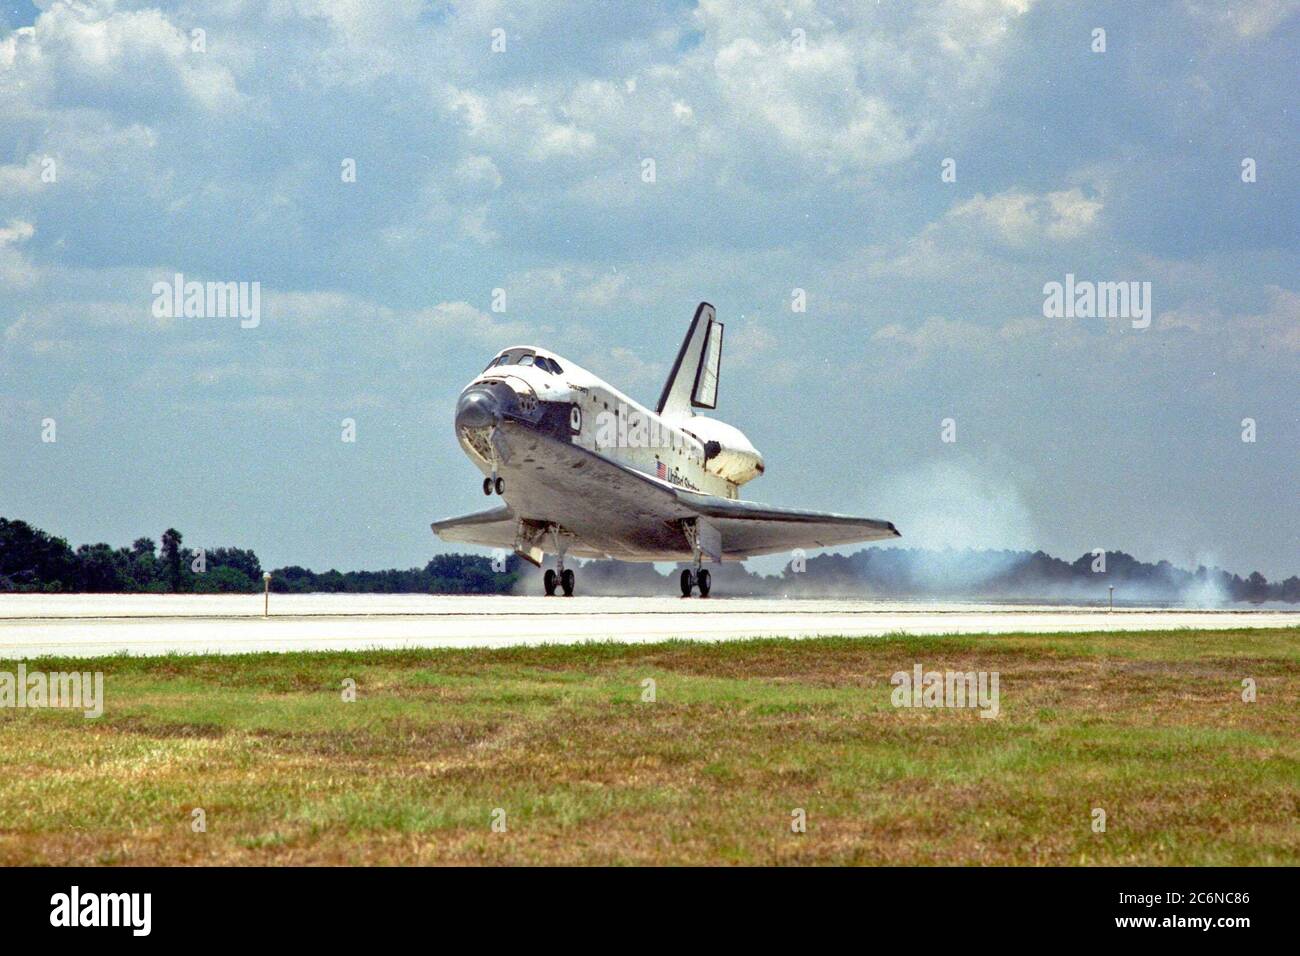 KENNEDY SPACE CENTER, FLA. -- The orbiter Discovery touches down on Runway 15 of KSC's Shuttle Landing Facility to complete the STS-91 mission. Main gear touchdown was at 2:00:18 p.m. EDT on June 12, 1998, landing on orbit 155 of the mission. The wheels stopped at 2:01:22 p.m. EDT, for a total mission-elapsed time of 9 days, 19 hours, 55 minutes and 1 second. Stock Photo